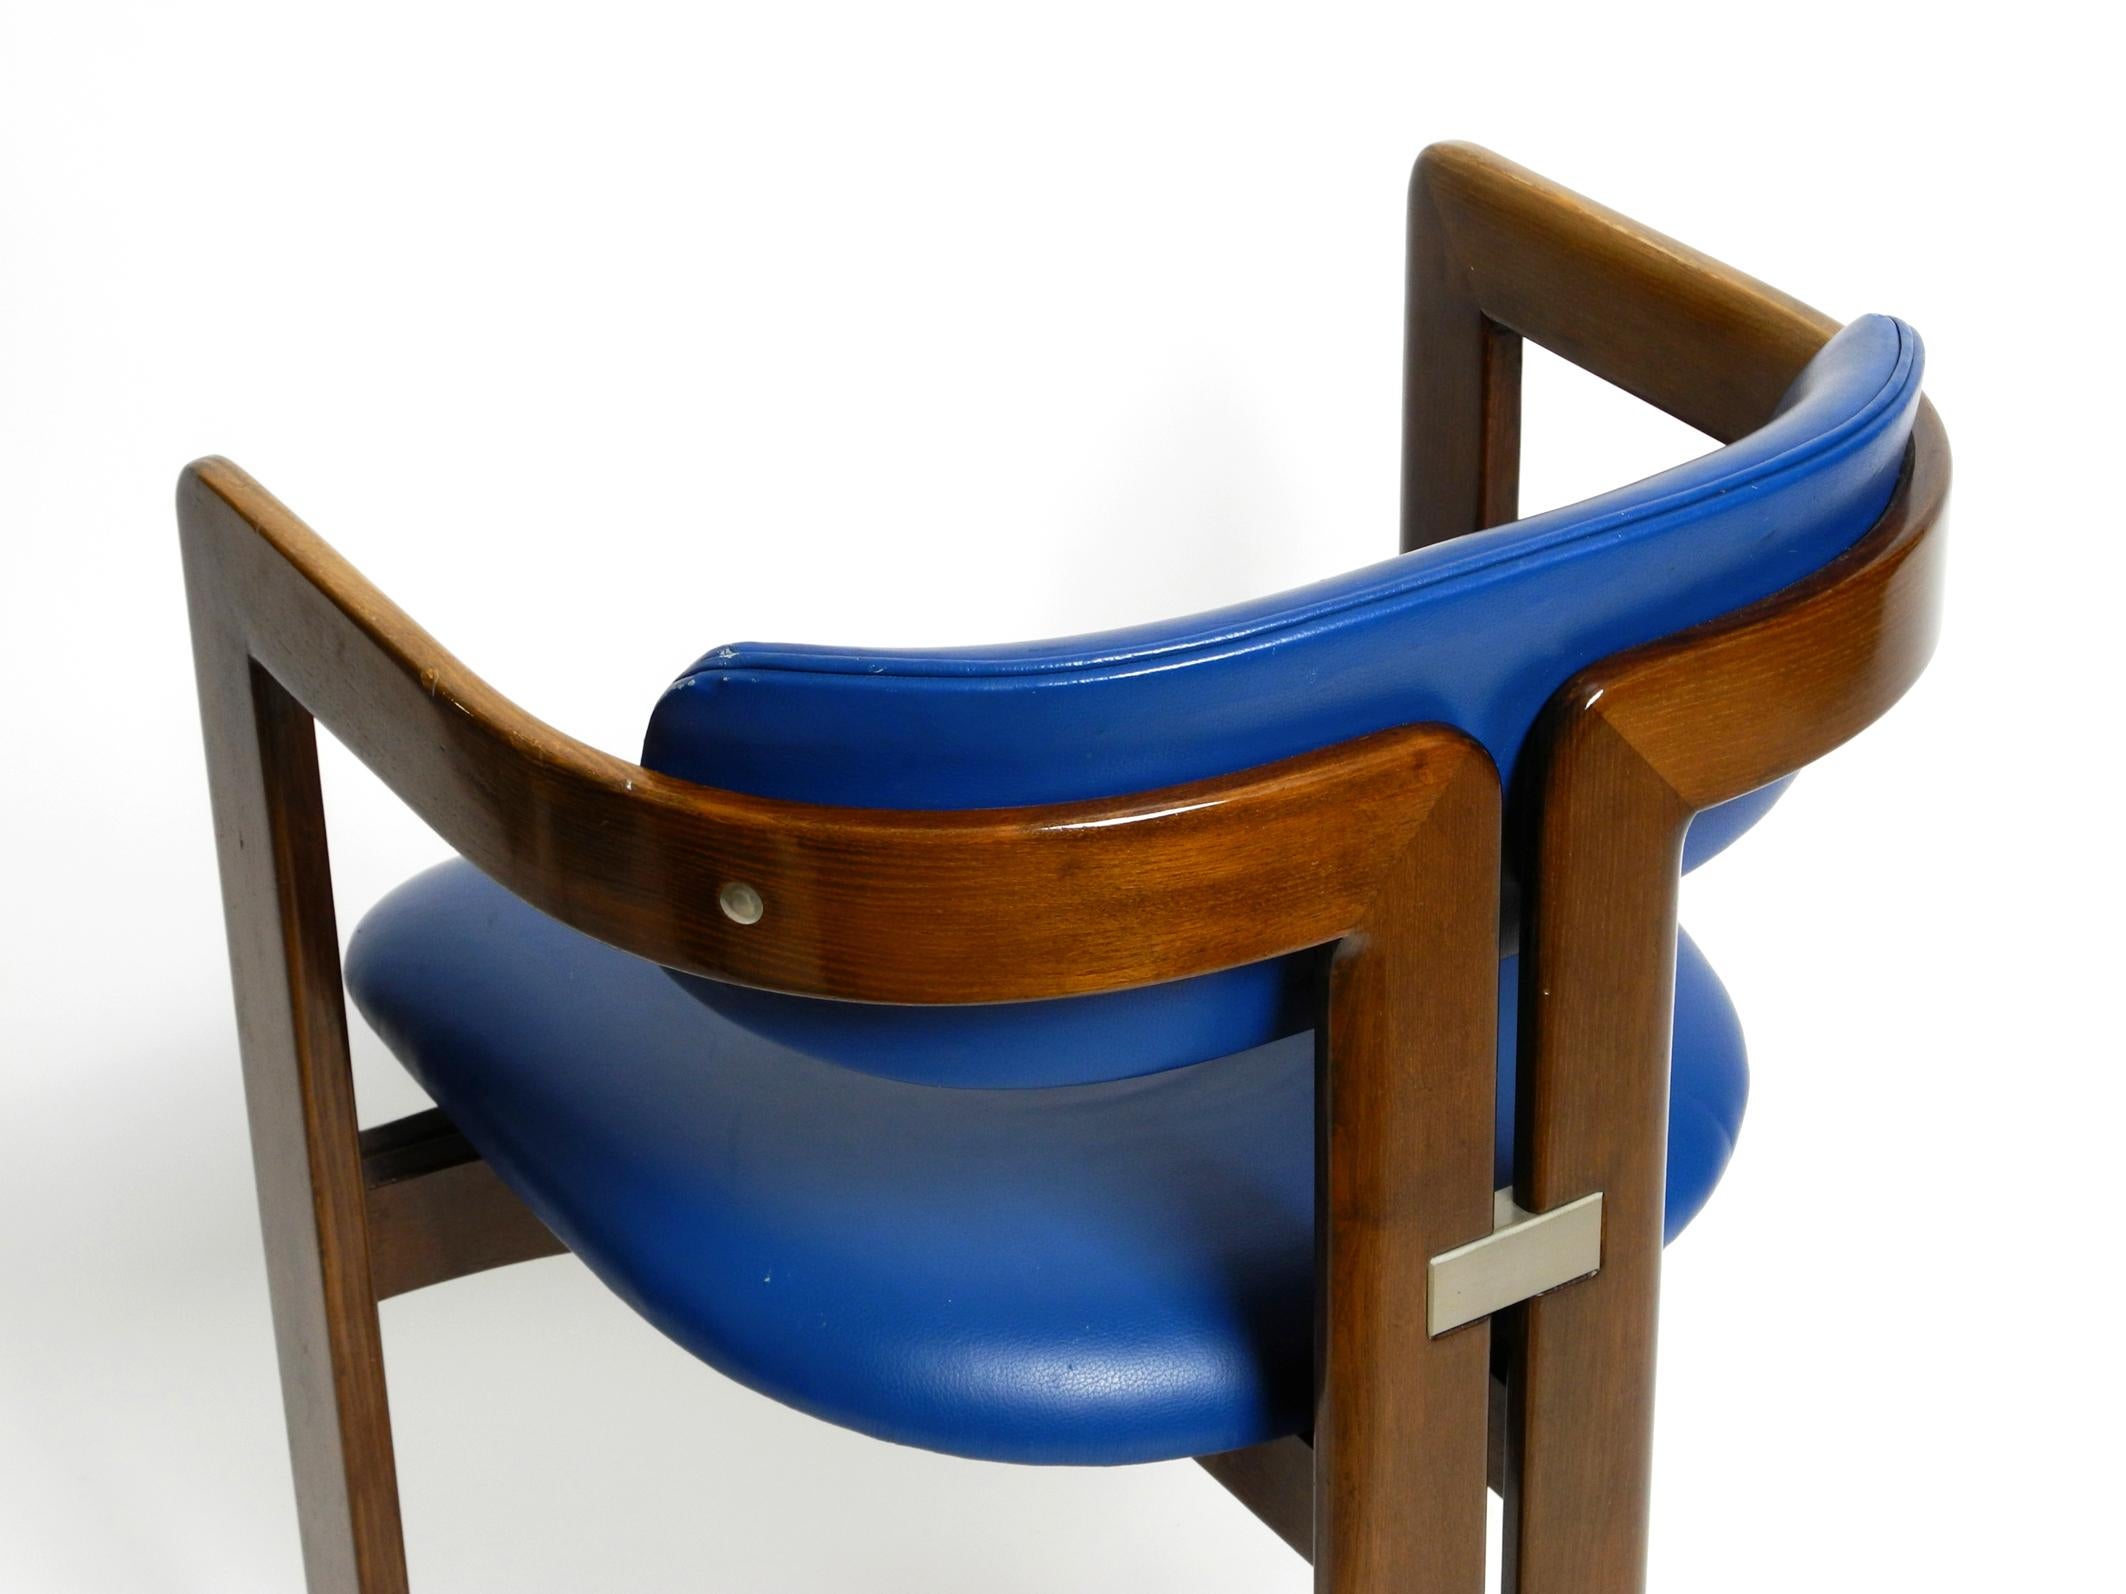 Late 20th Century Pamplona Chair by Augusto Savini for Pozzi in Blue Leather Upholstery